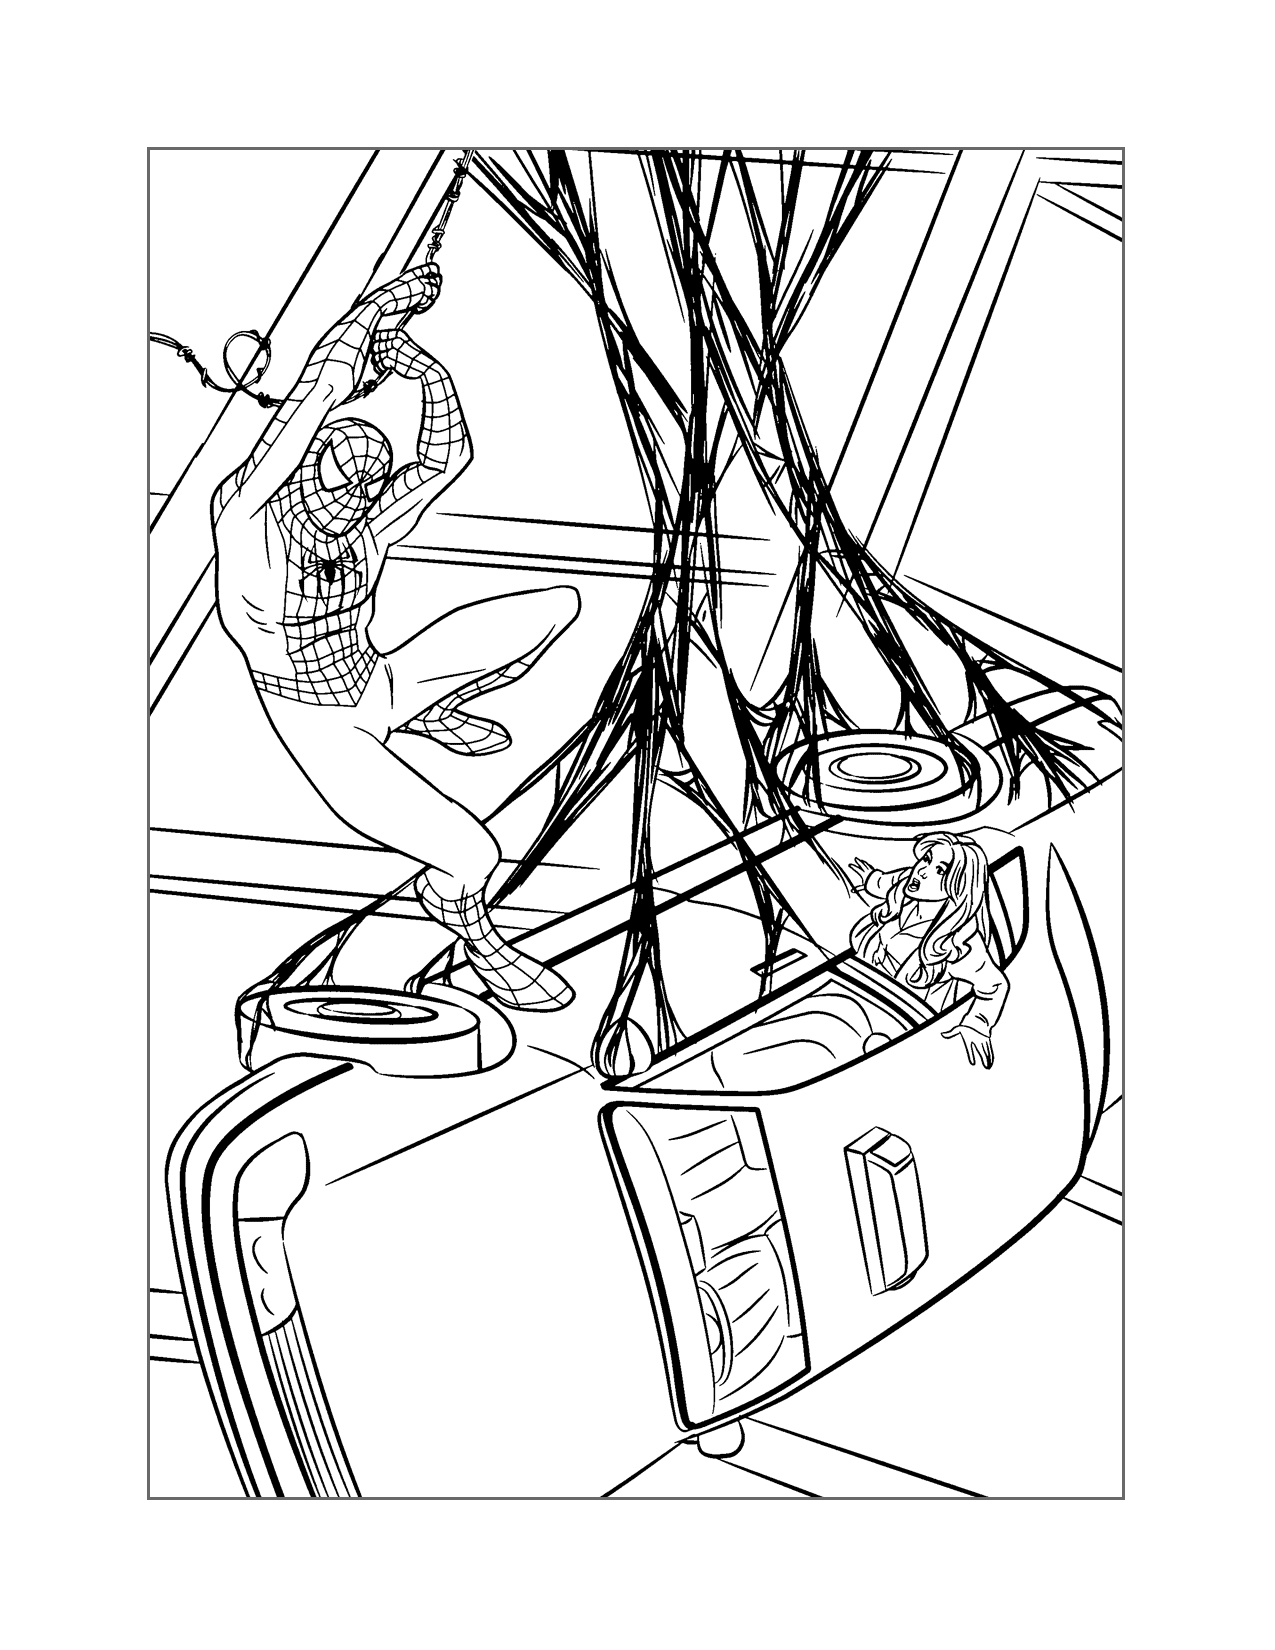 Spiderman Saves Mary Jane Coloring Page